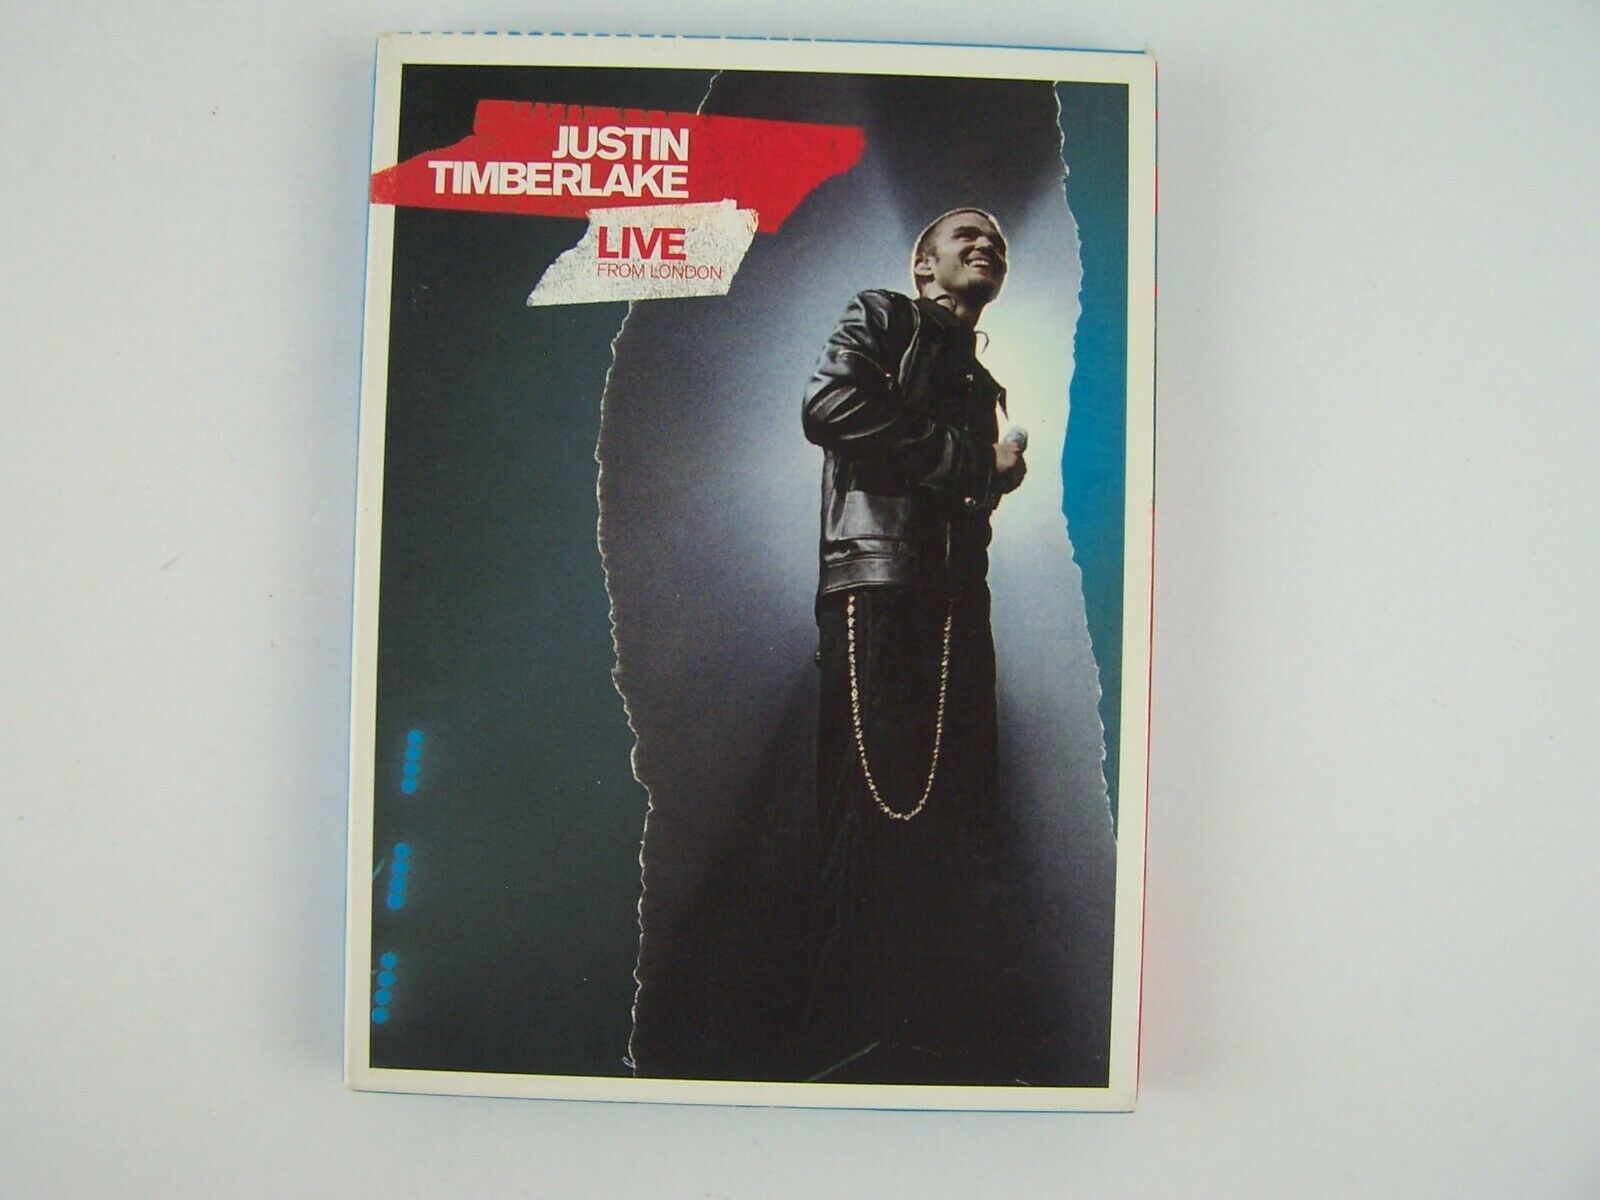 Primary image for Justin Timberlake - Live From London DVD